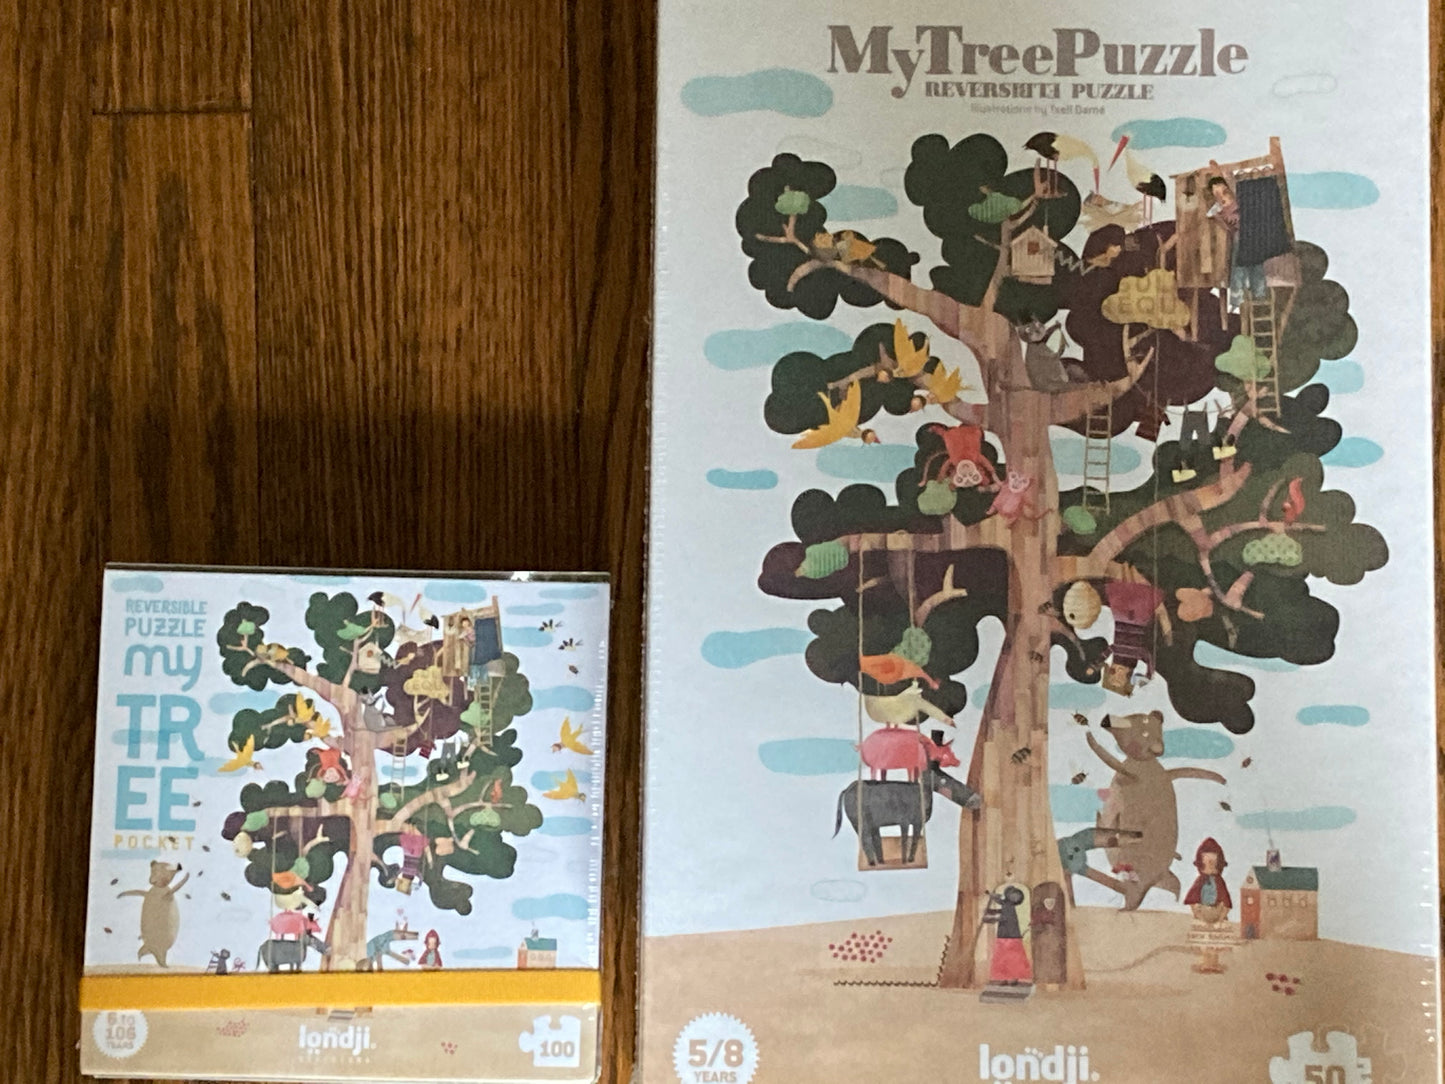 Puzzle - MY TREE (large size) - Reversible.